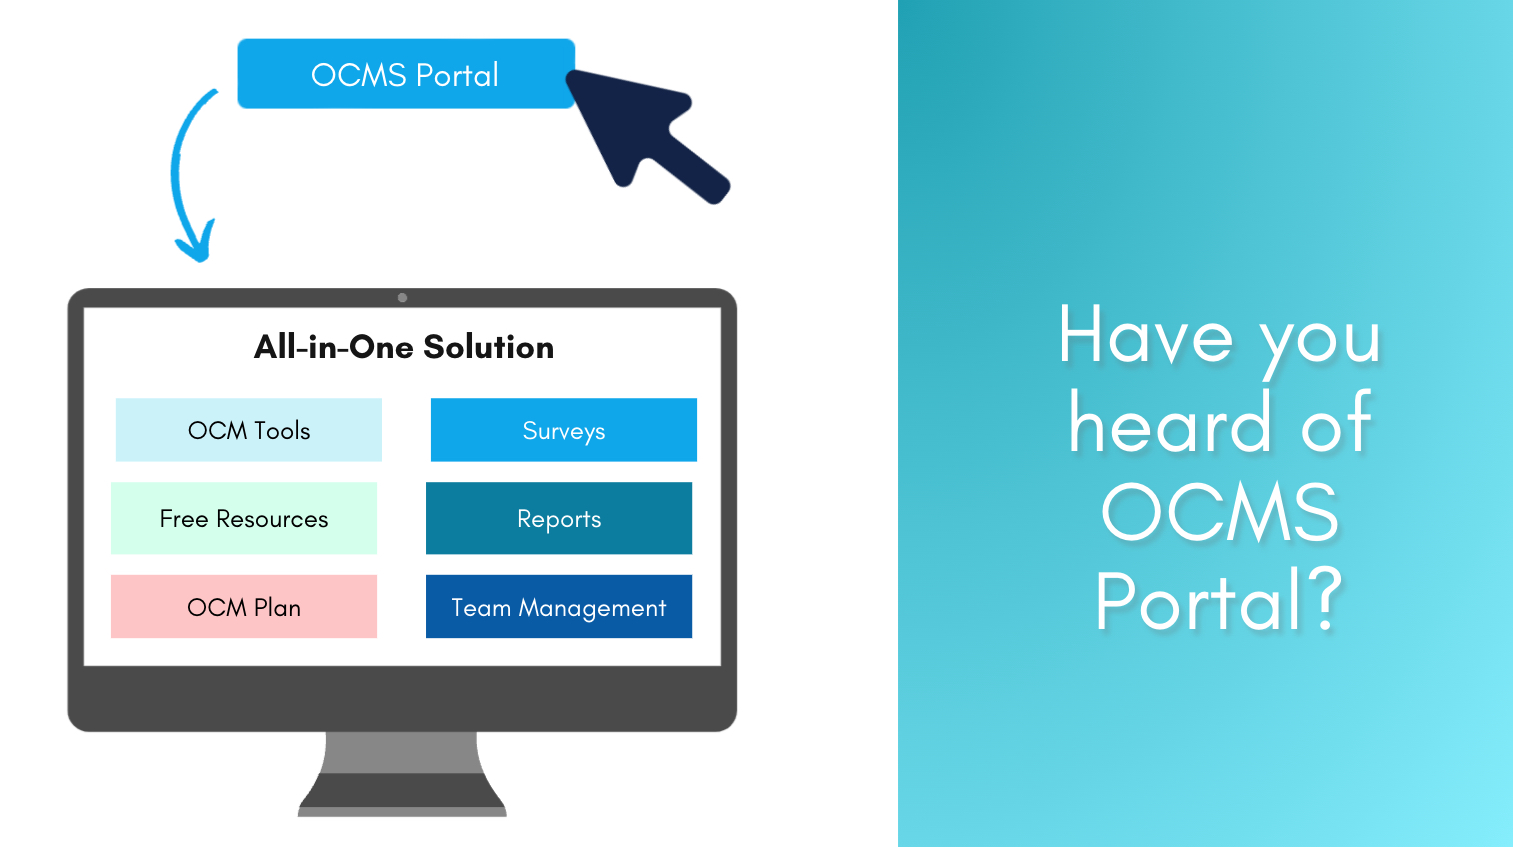 Do you know what OCMS Portal is?